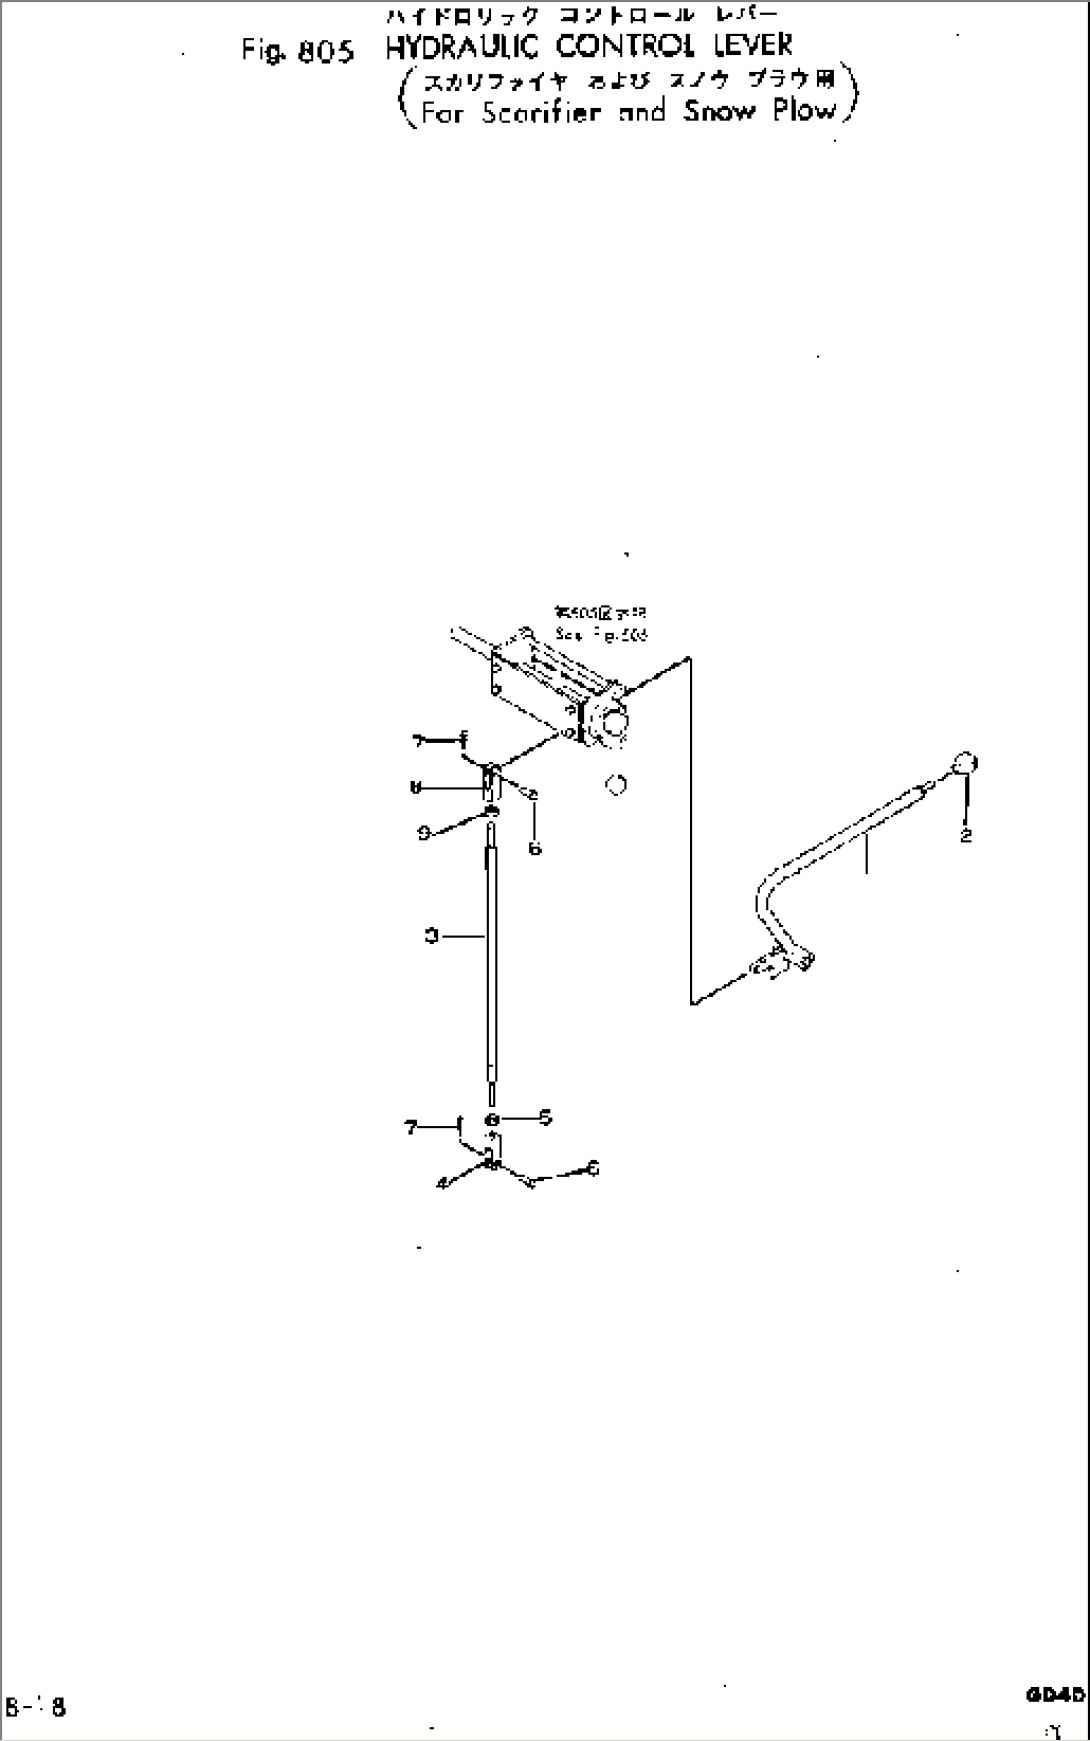 HYDRAULIC CONTROL LEVER (FOR SCARIFIER AND SNOW PLOW)